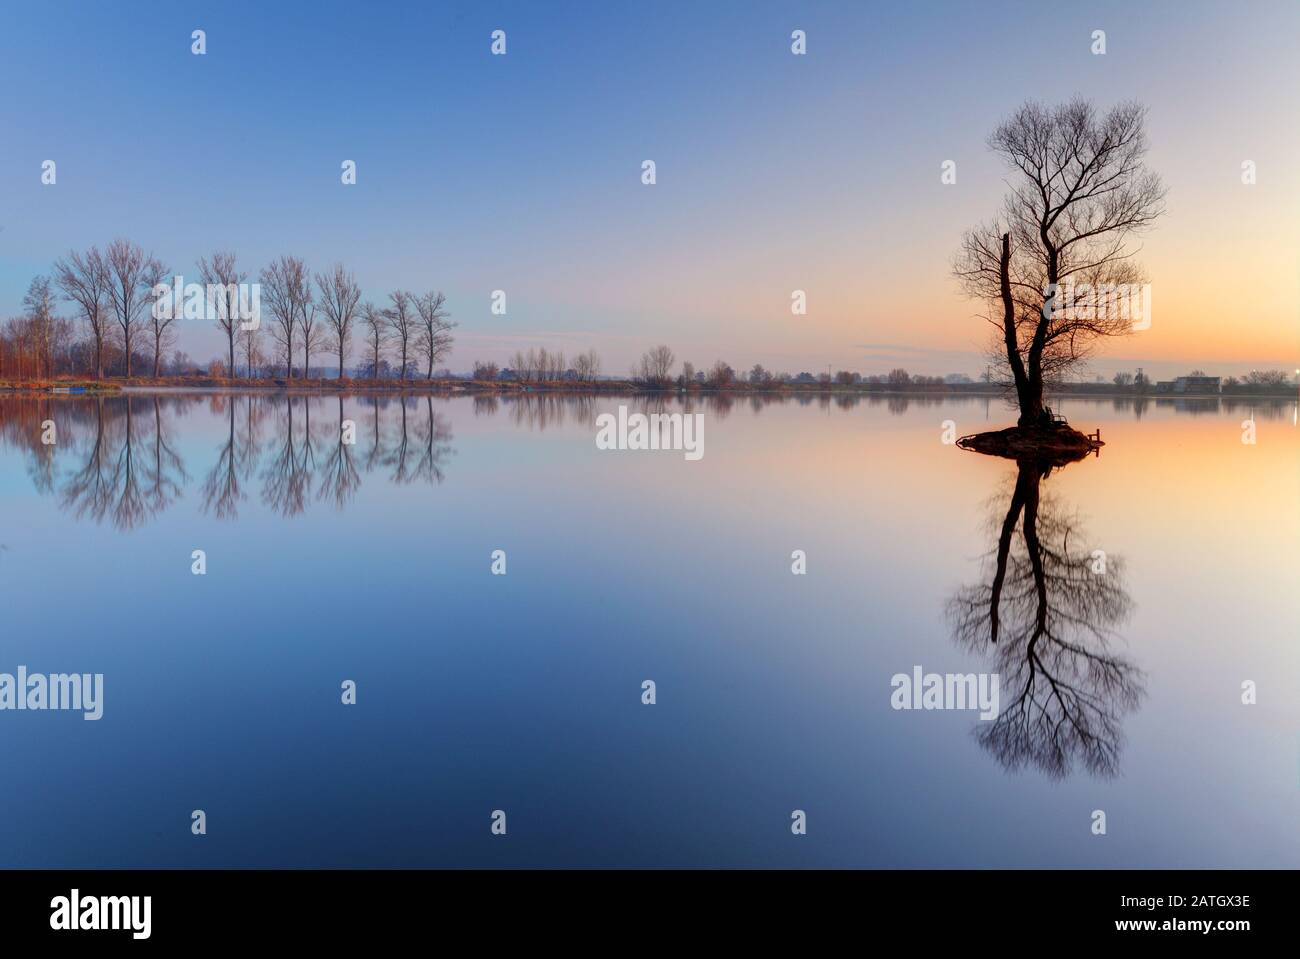 Alone tree in lake with color sky Stock Photo